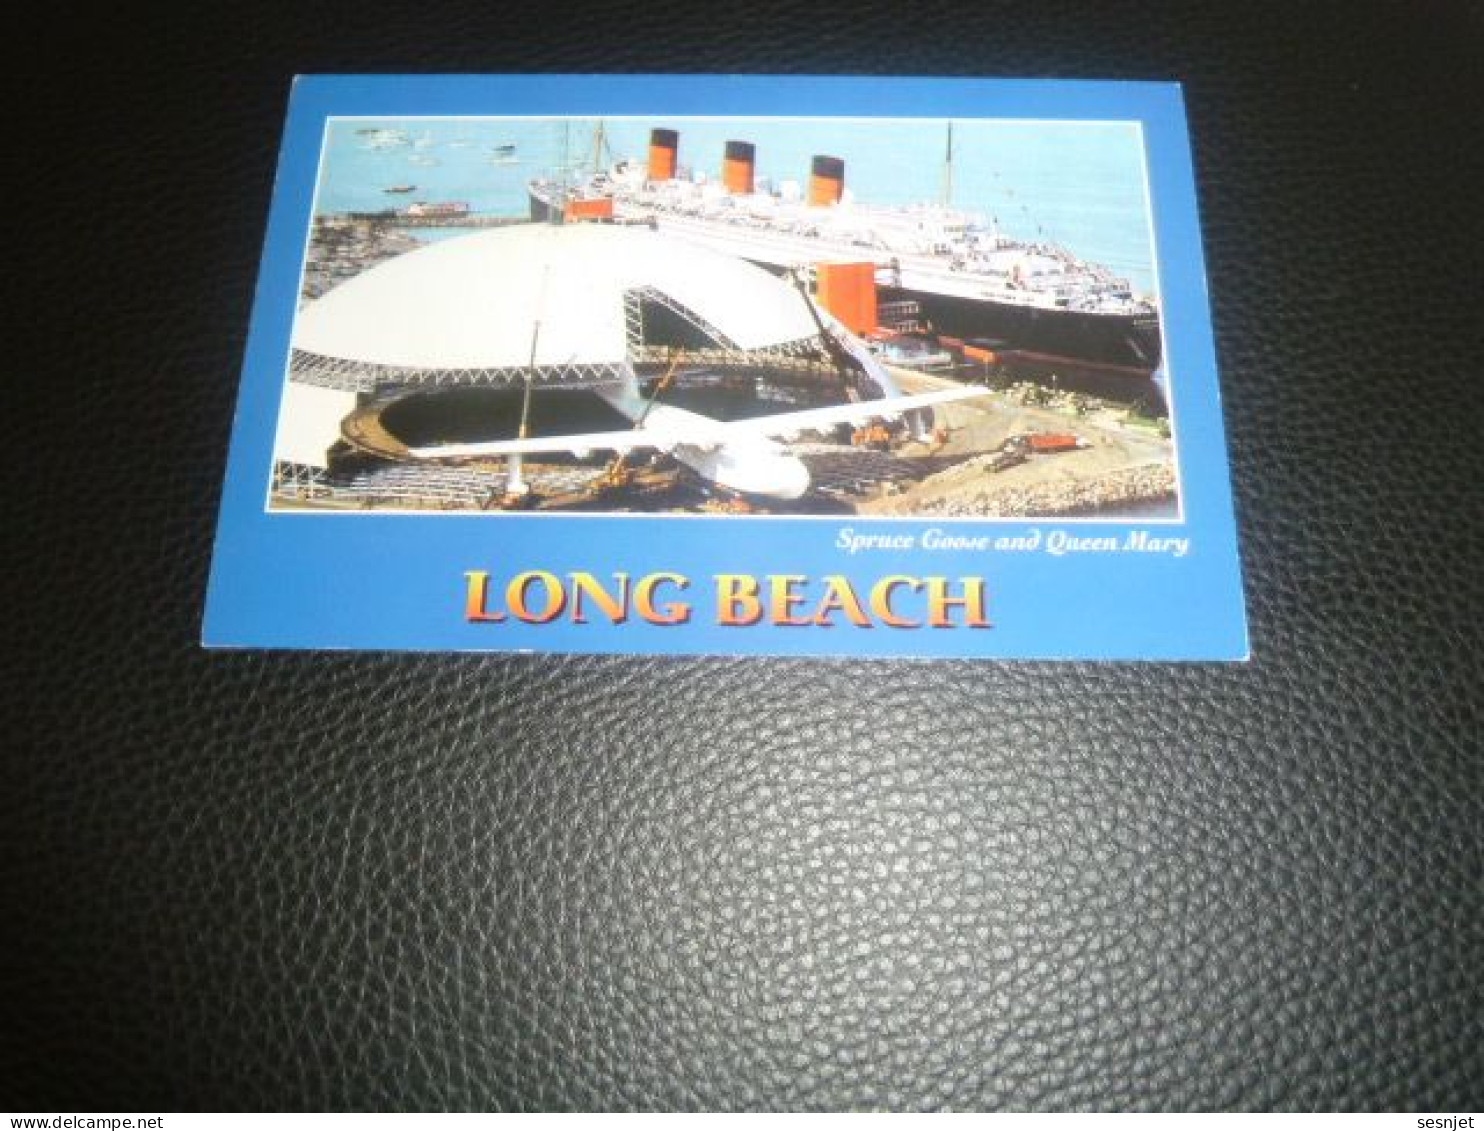 Long Beach - The Spuce Goose And The Queen Mary - Mla-317 - Editions Majestic - Année 1982 - - Long Beach